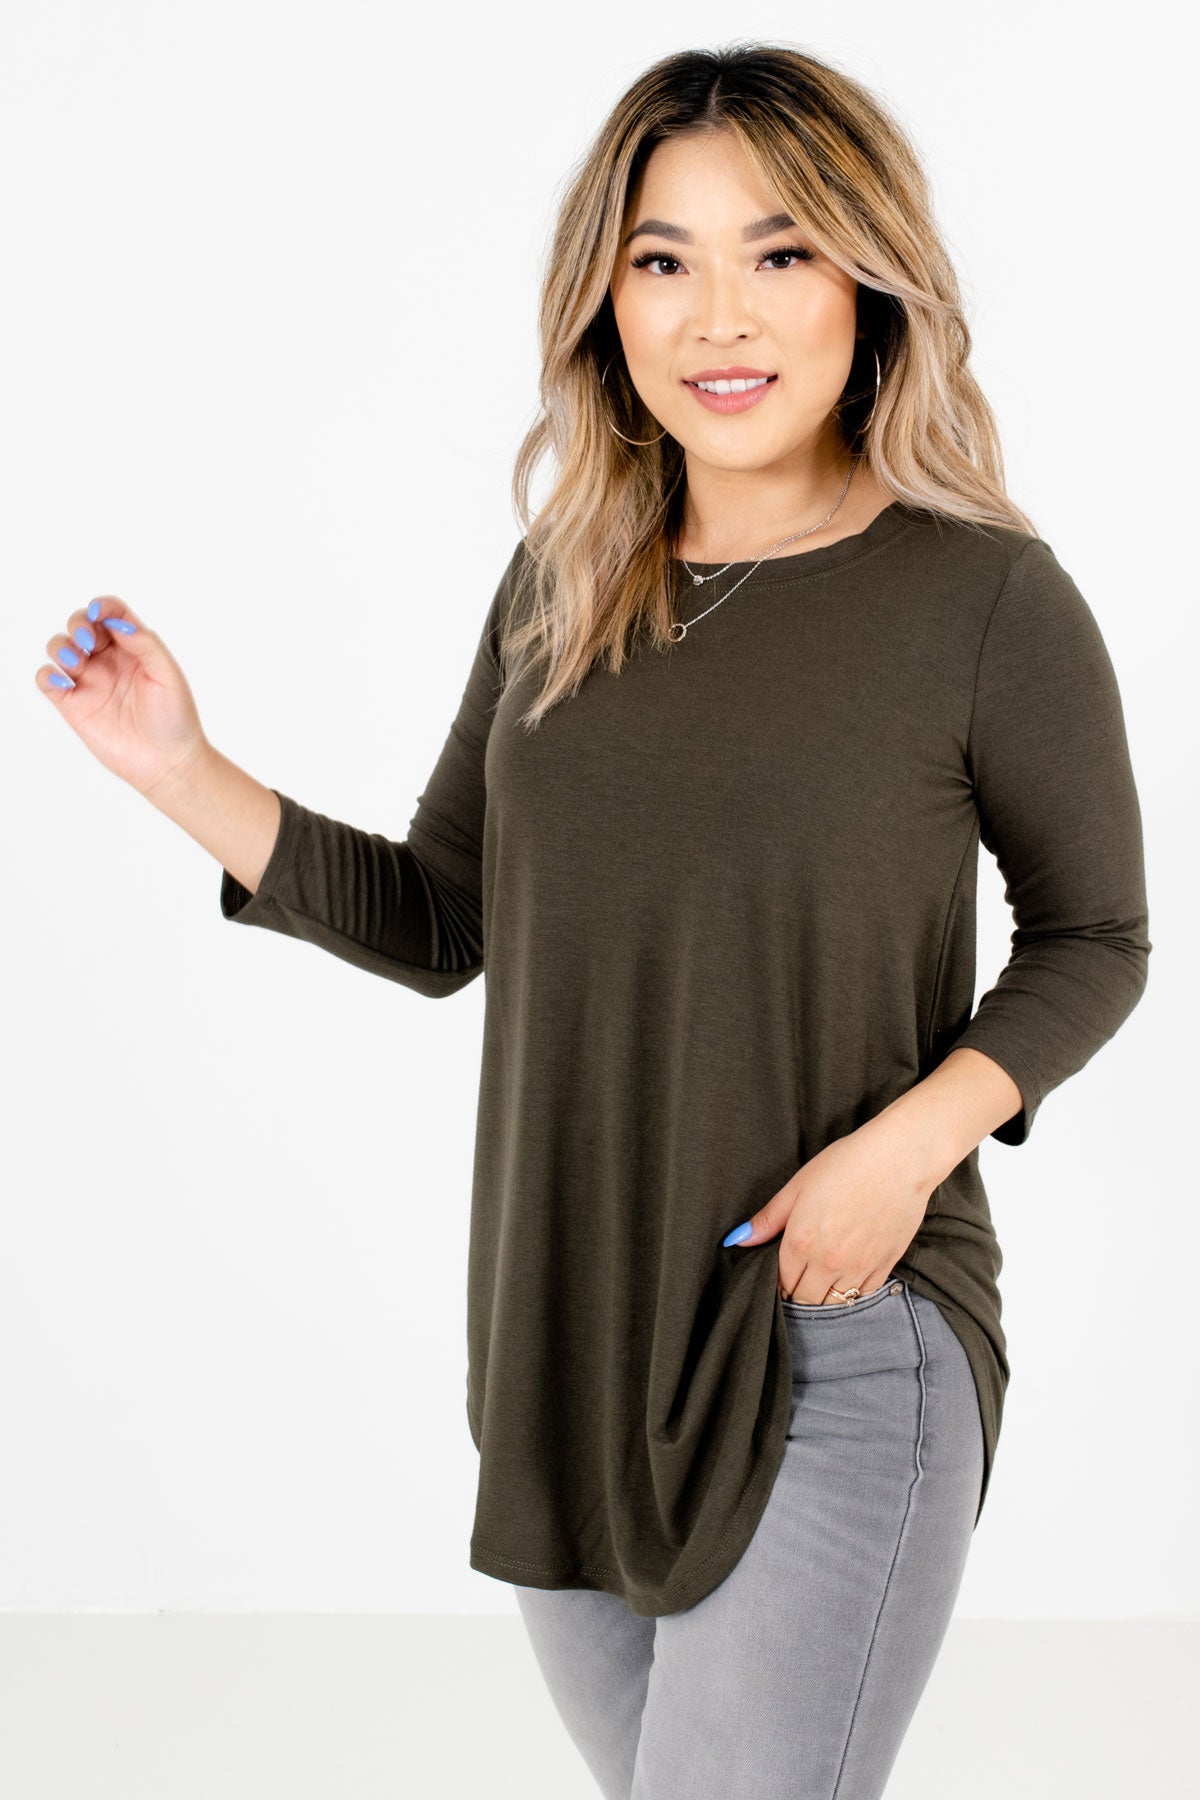 Women’s Olive Green Basics Boutique Top